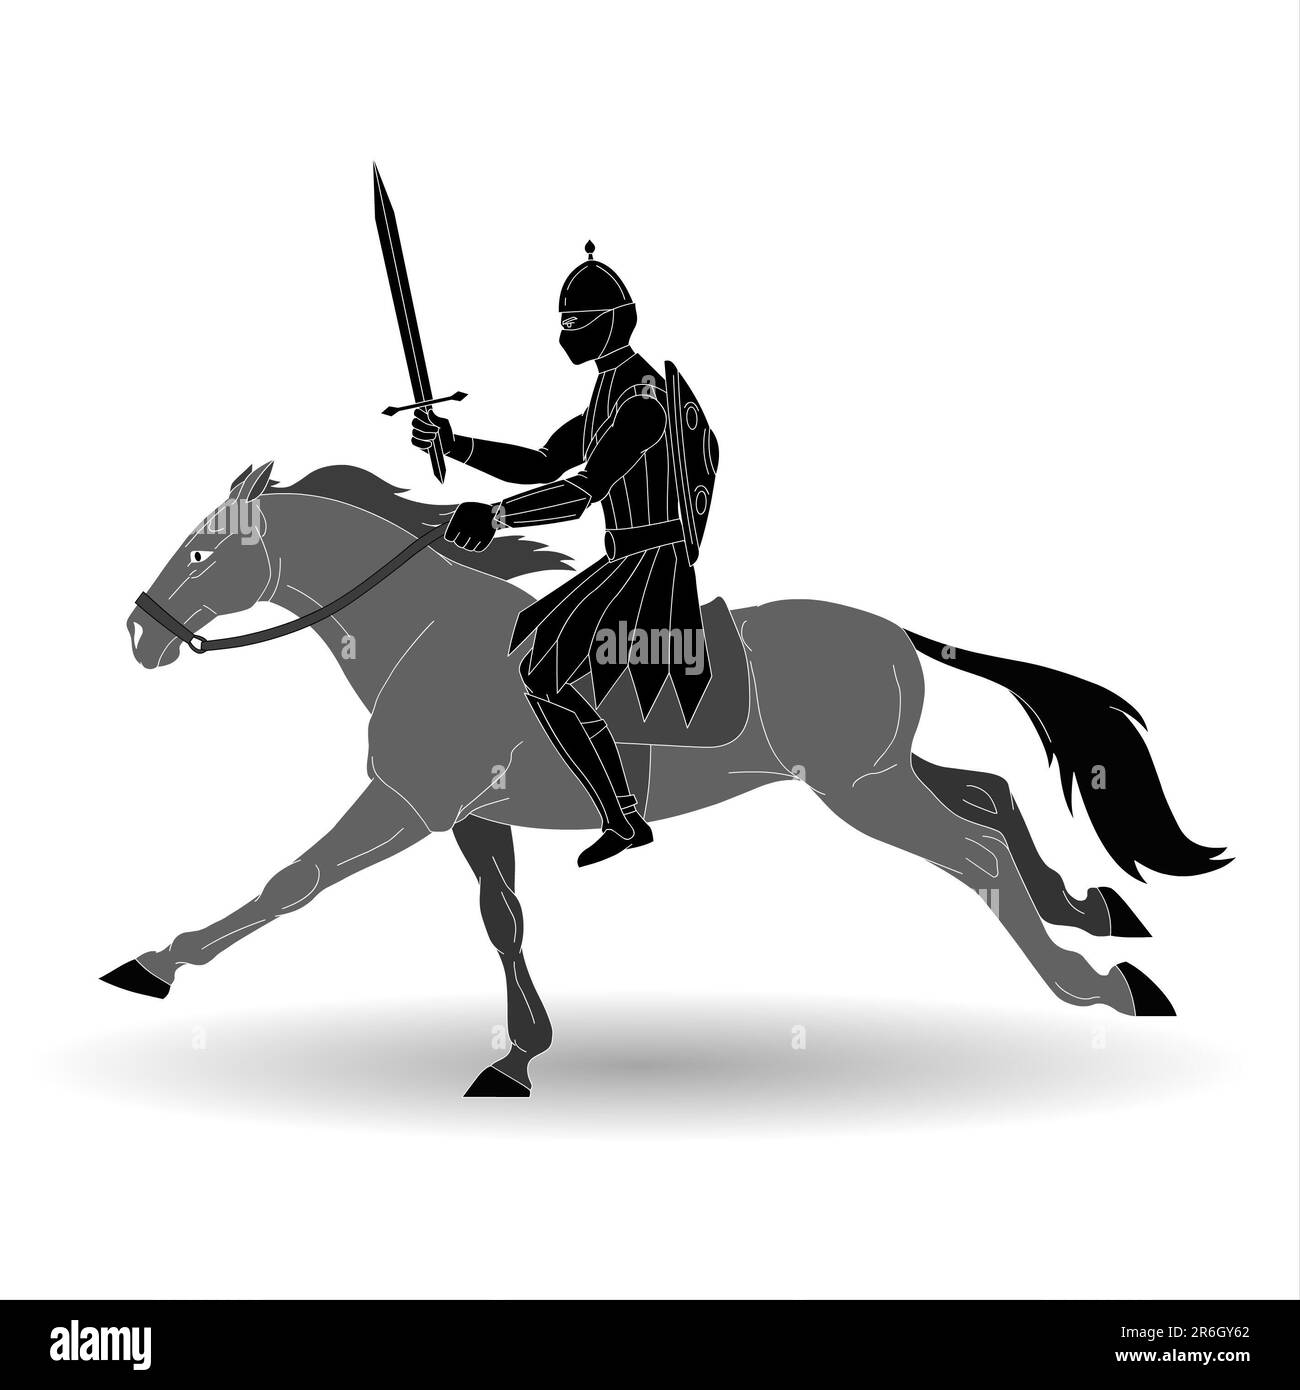 Riding Knight with sword on horse back Stock Photo